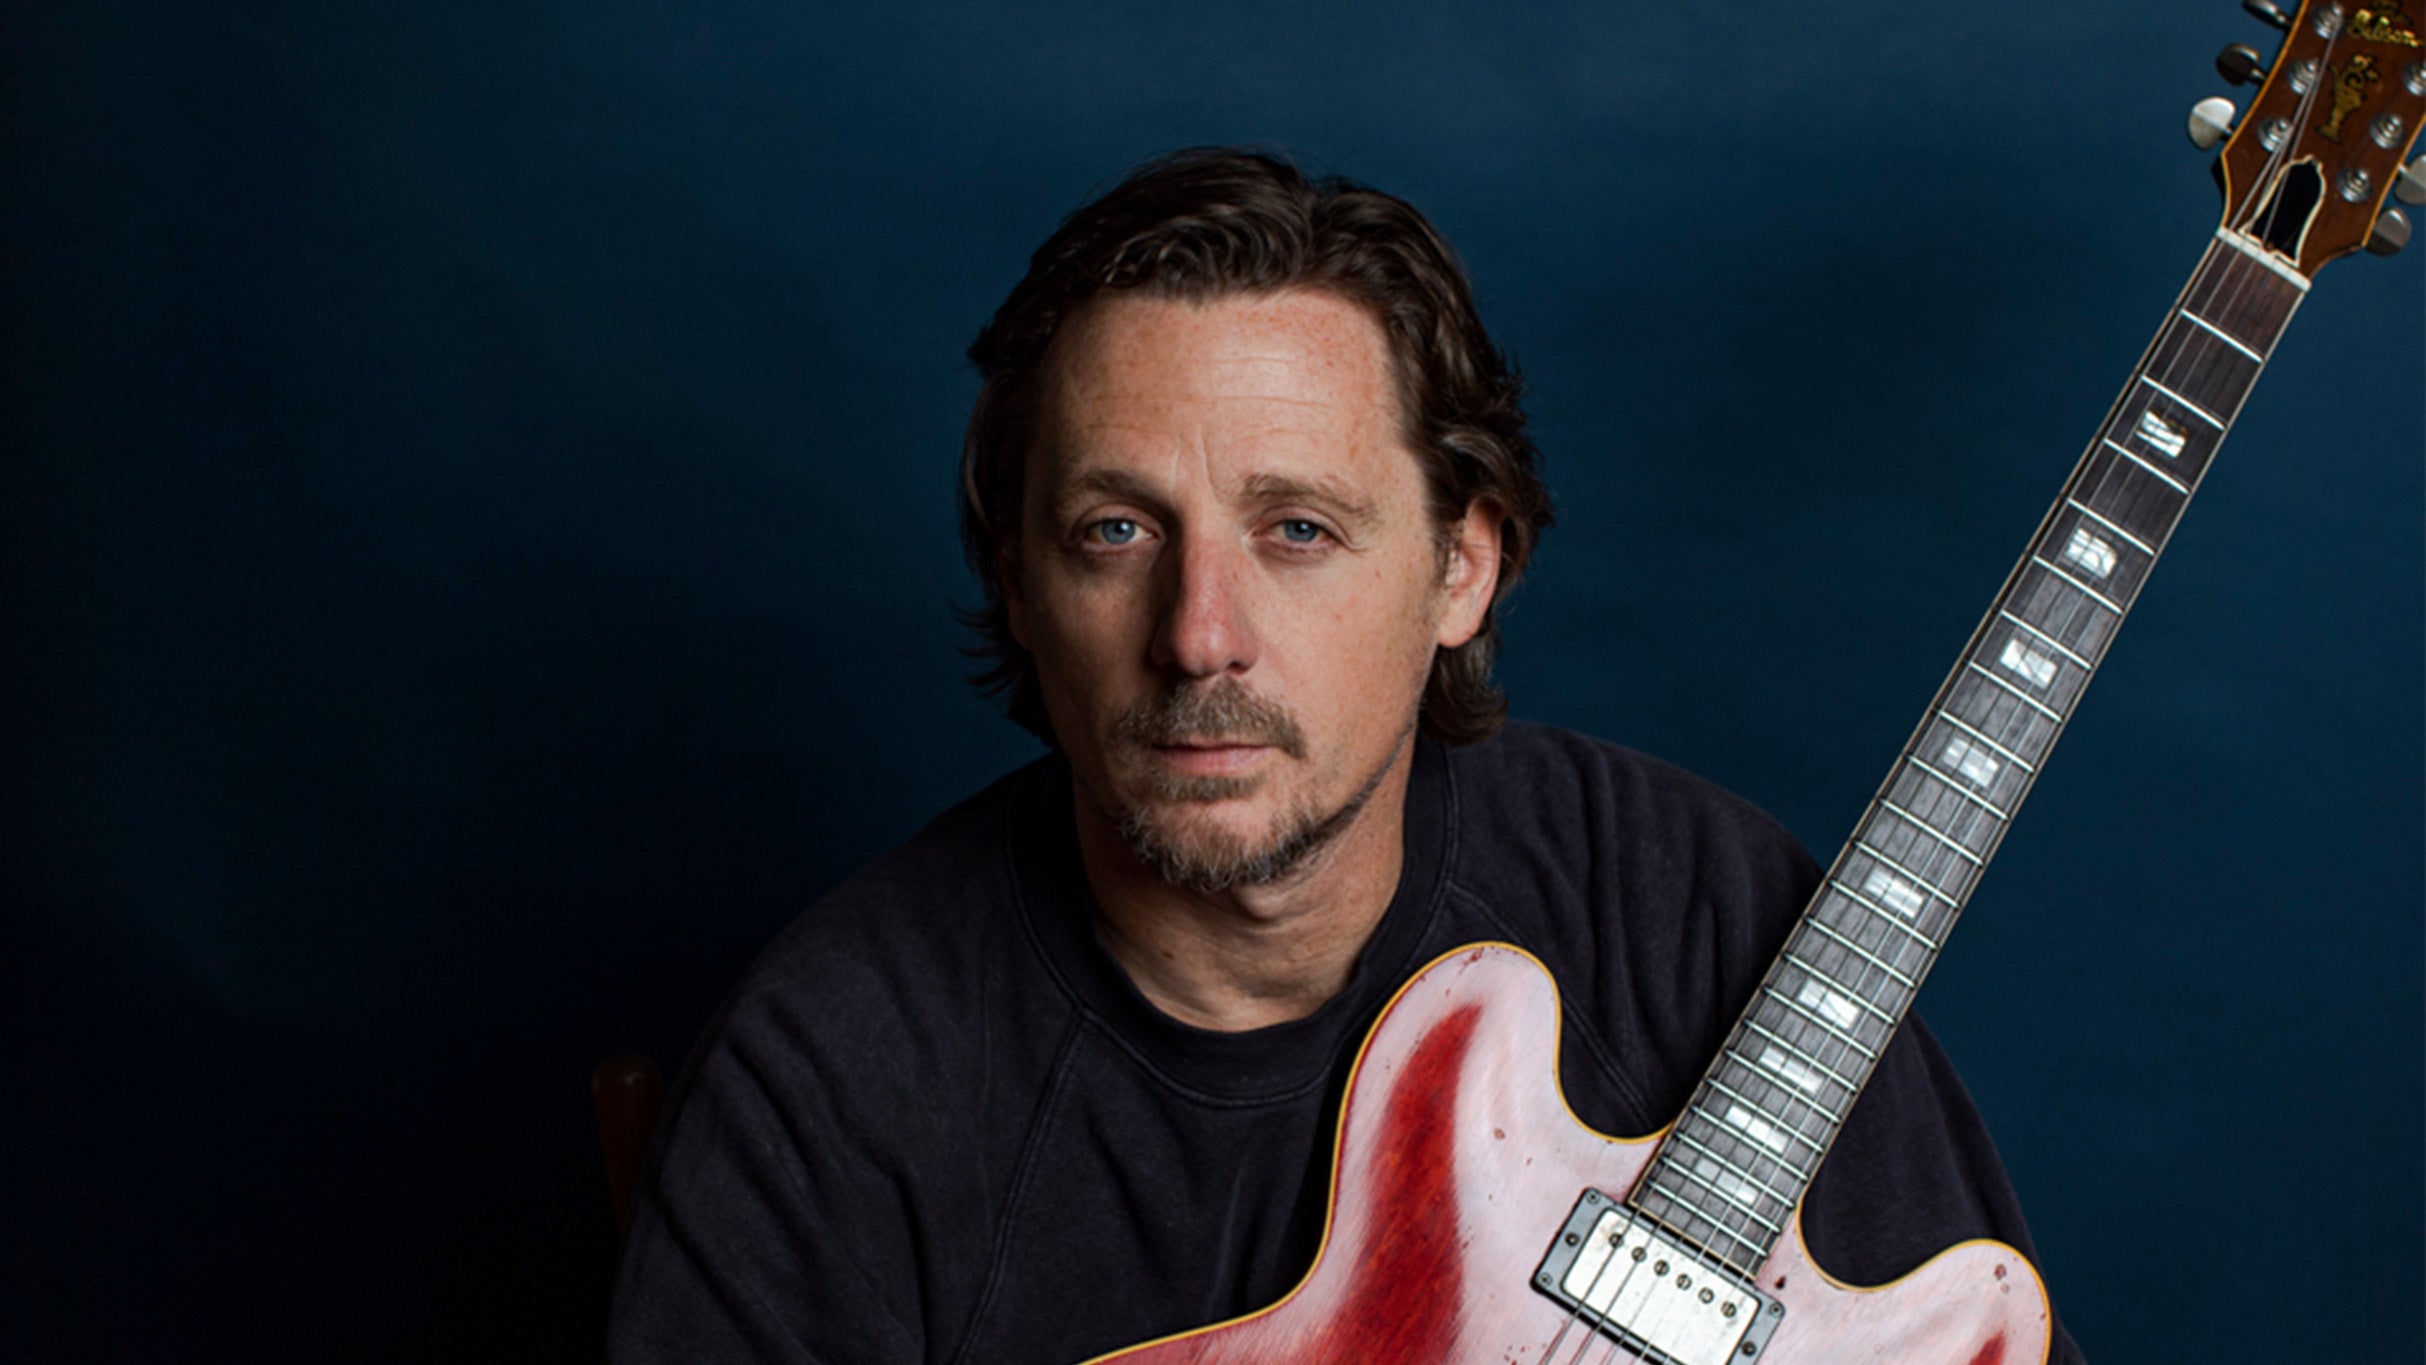 An Evening with Sturgill Simpson - Why Not? Tour presale password for legit tickets in Boston